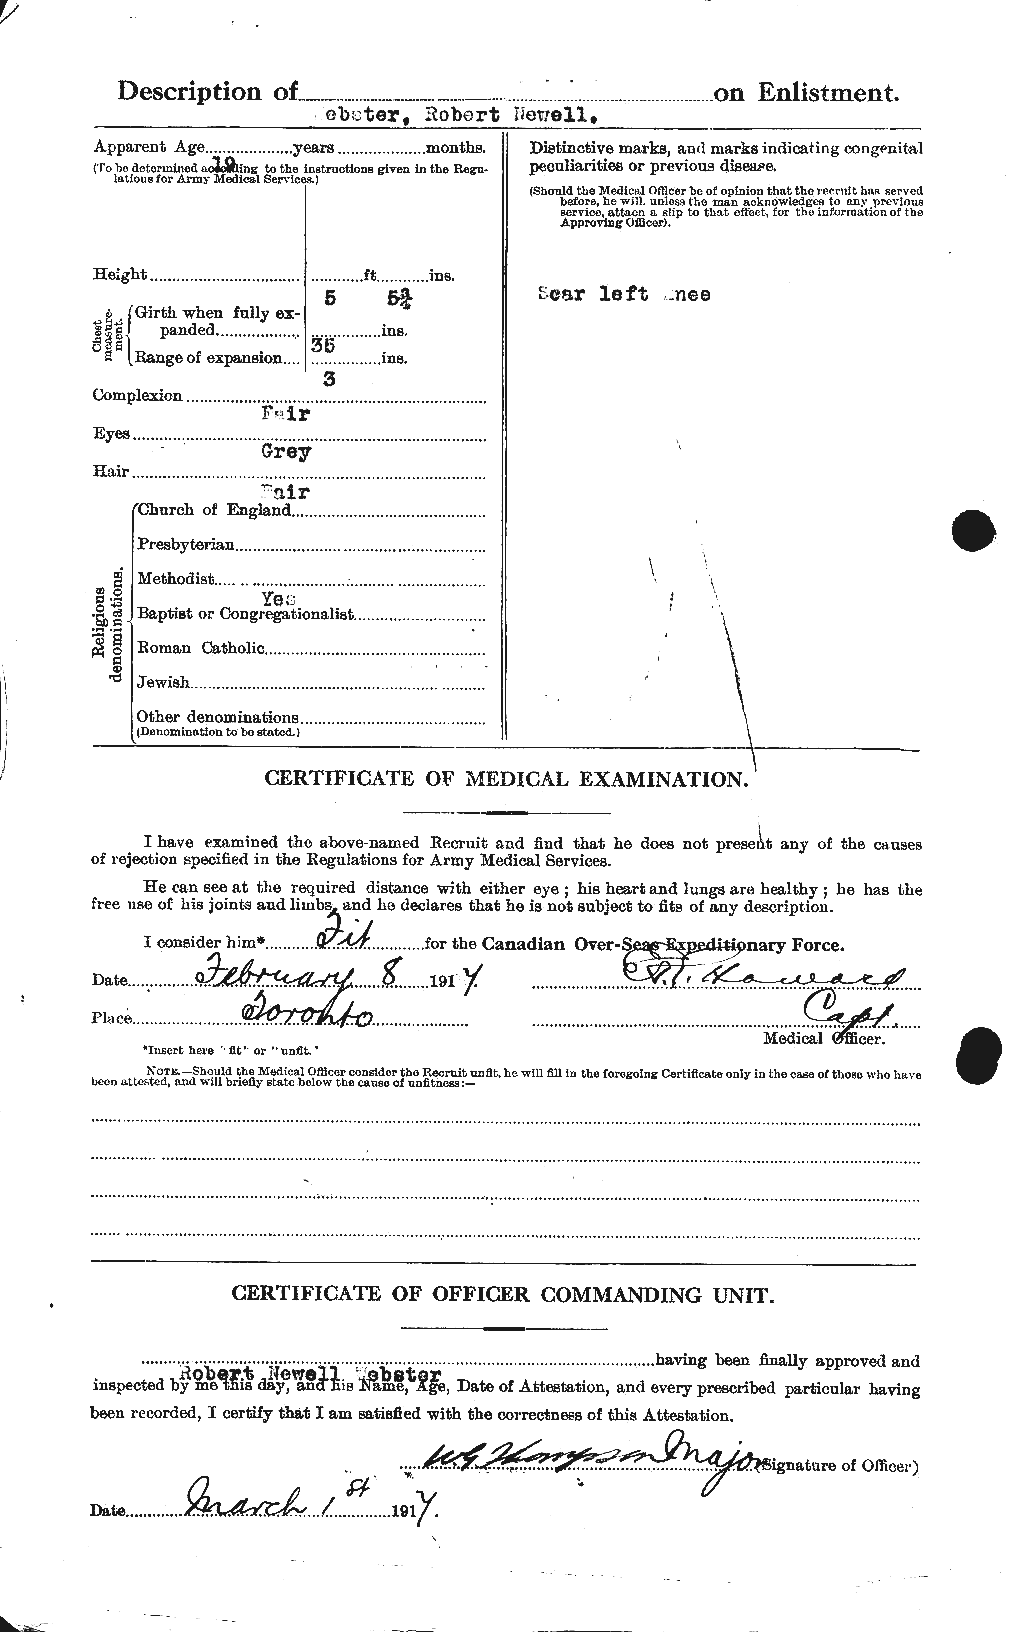 Personnel Records of the First World War - CEF 661968b